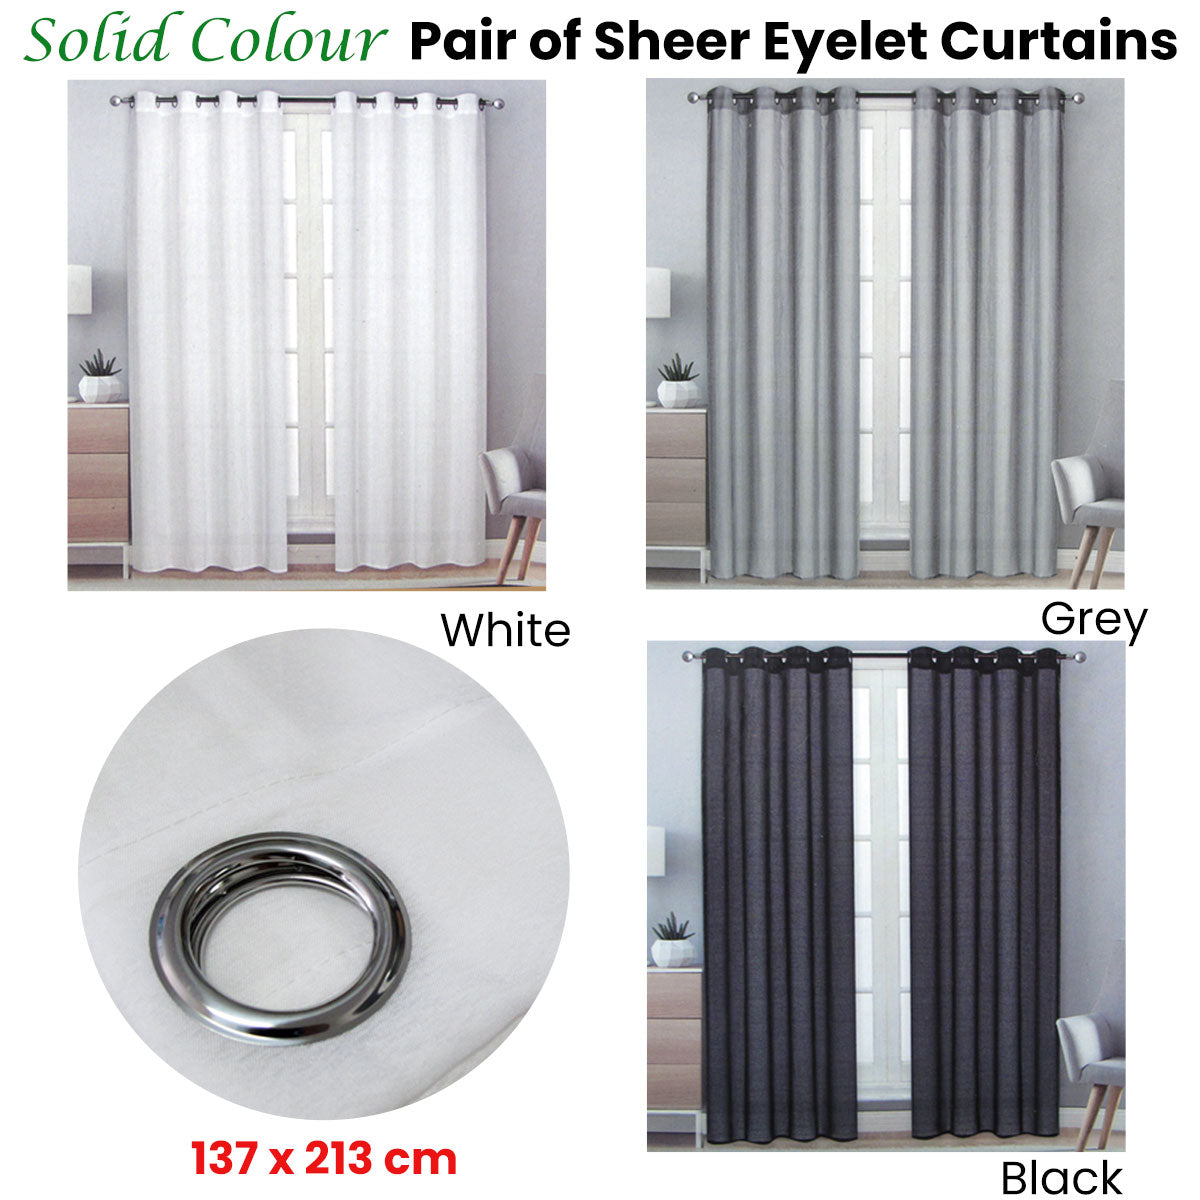 Pair of Solid Colour Sheer Eyelet Curtains 137 x 213 cm Black